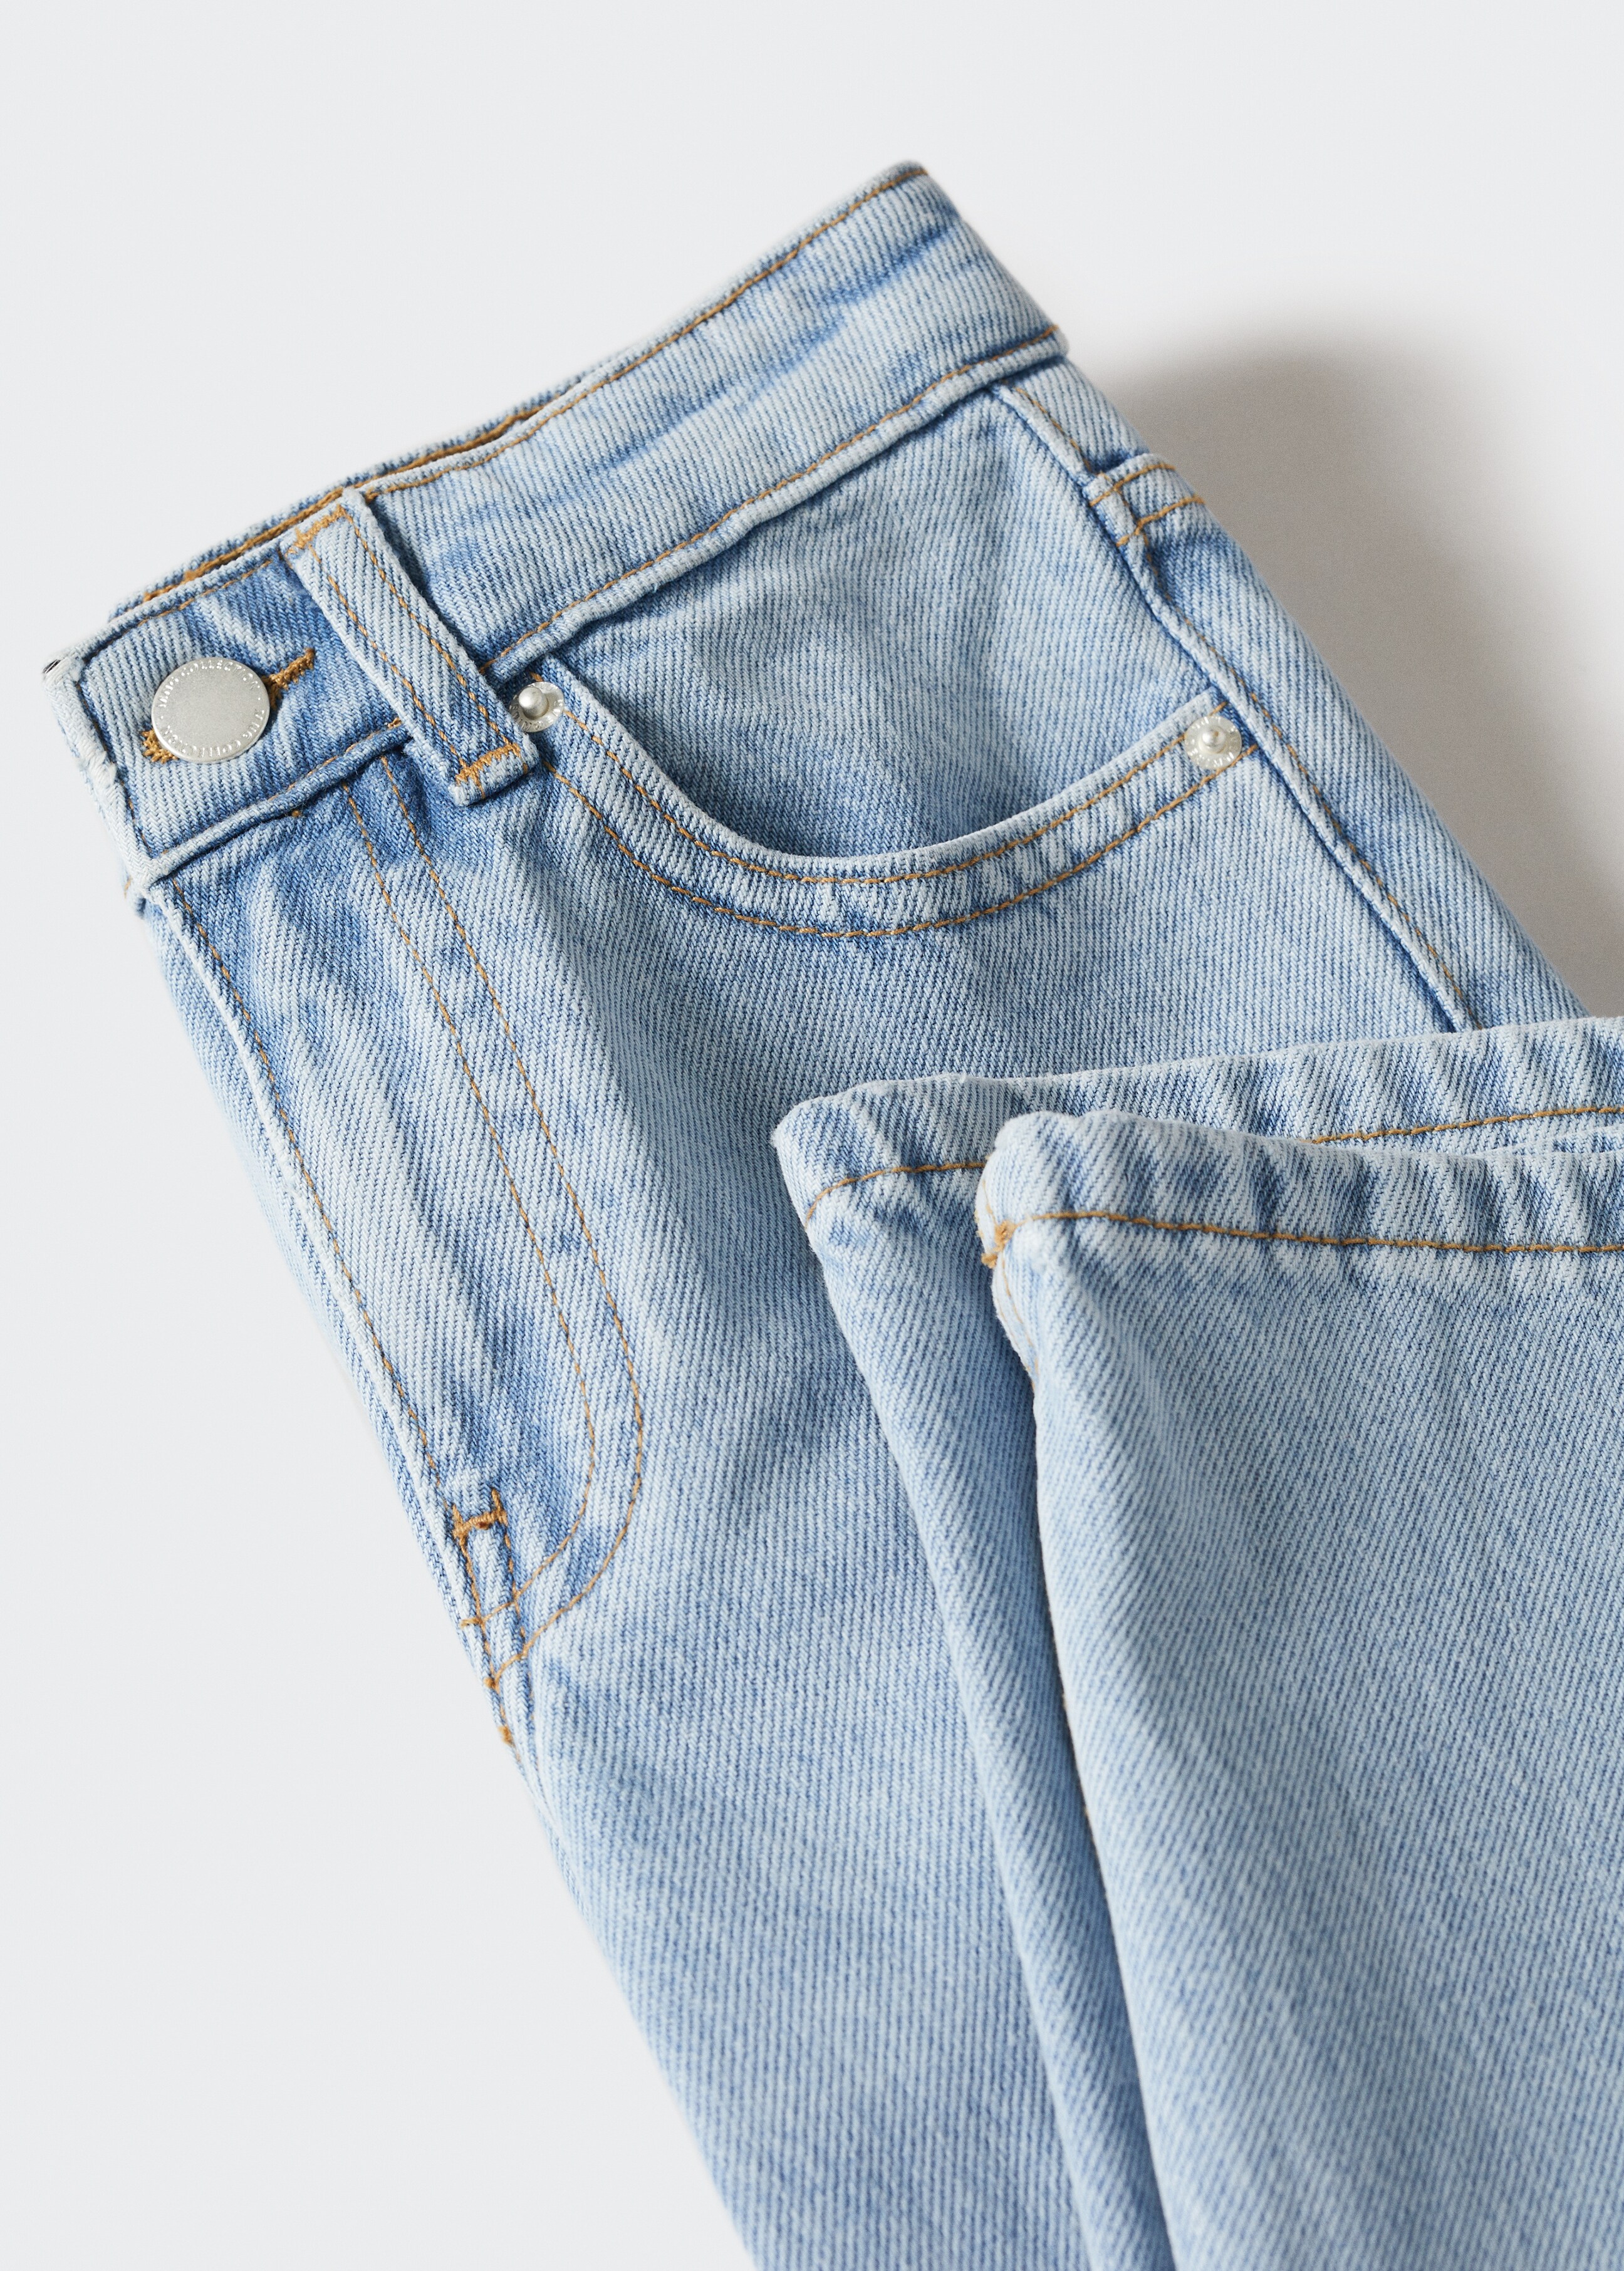 Culotte jeans - Details of the article 8